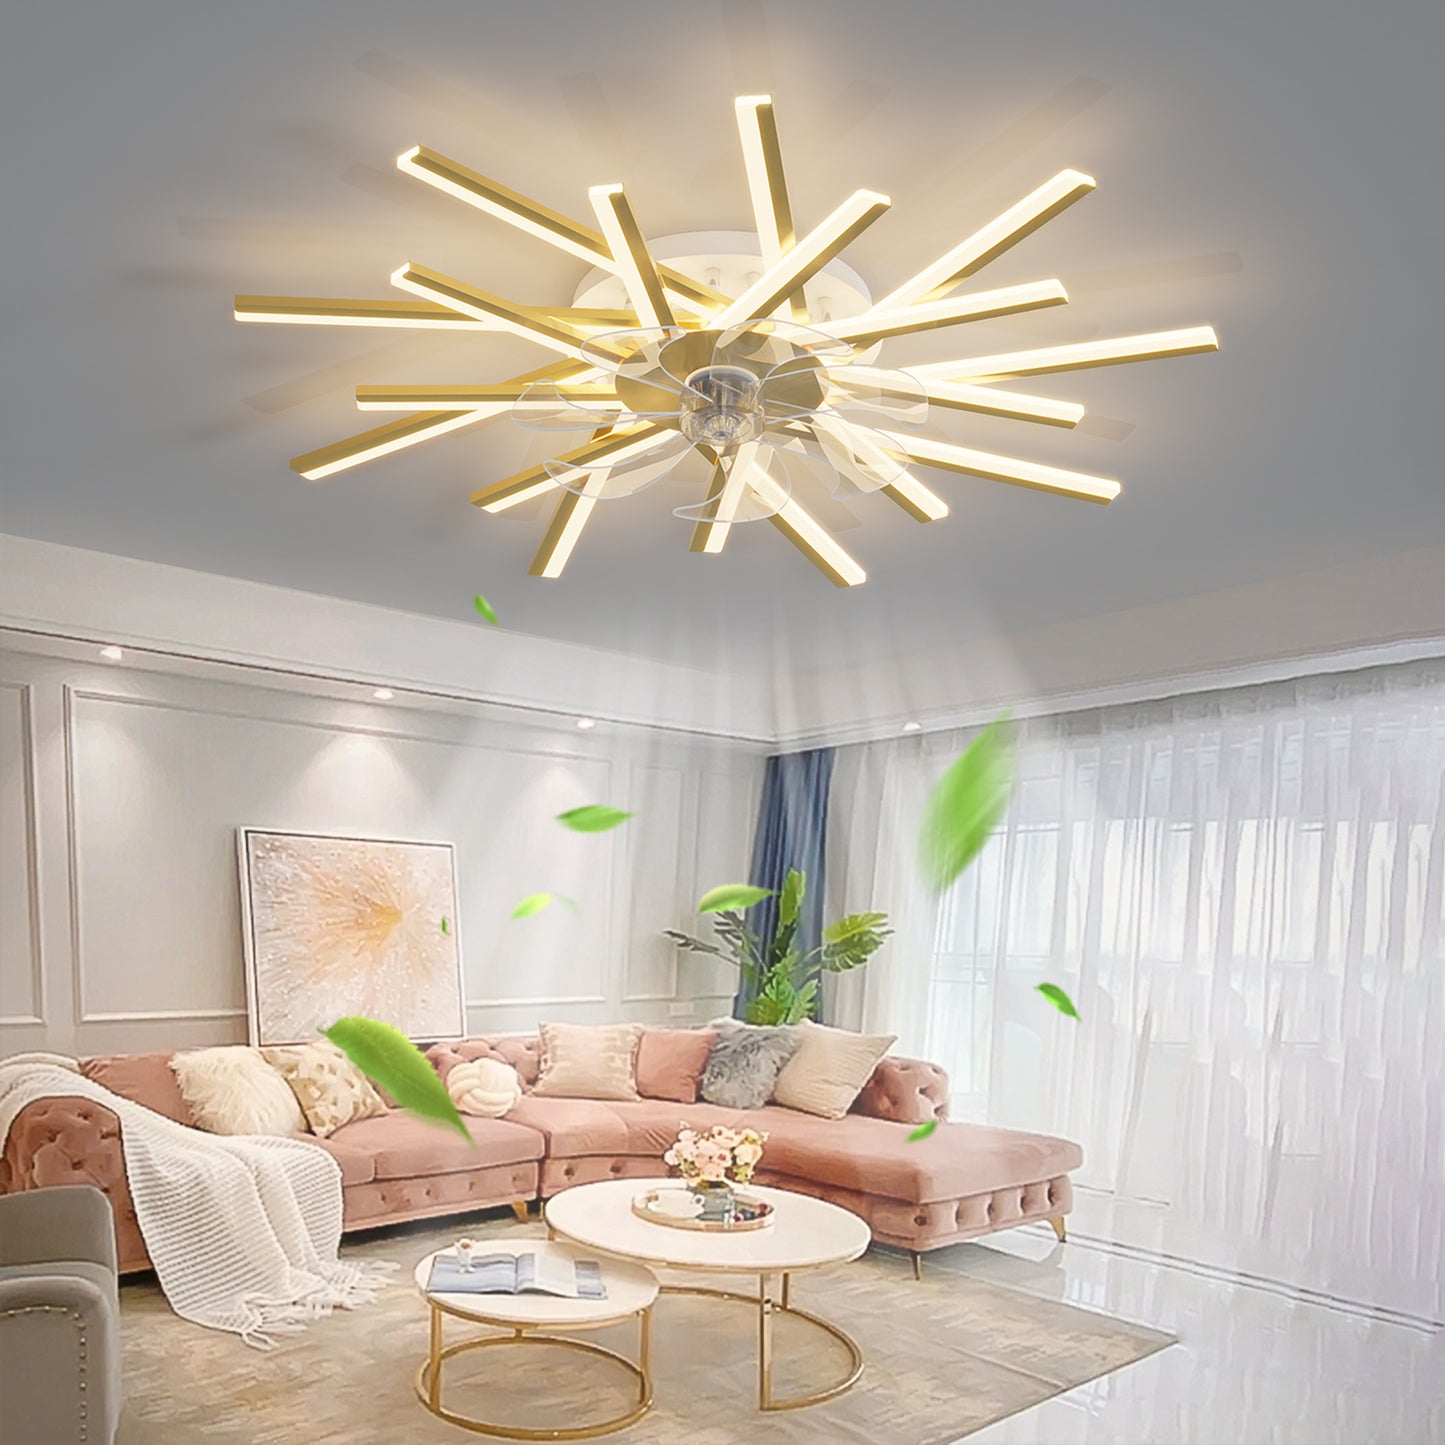 36-Inch Modern Gold Ceiling Fan with Remote Control and Dimmable LED Lights